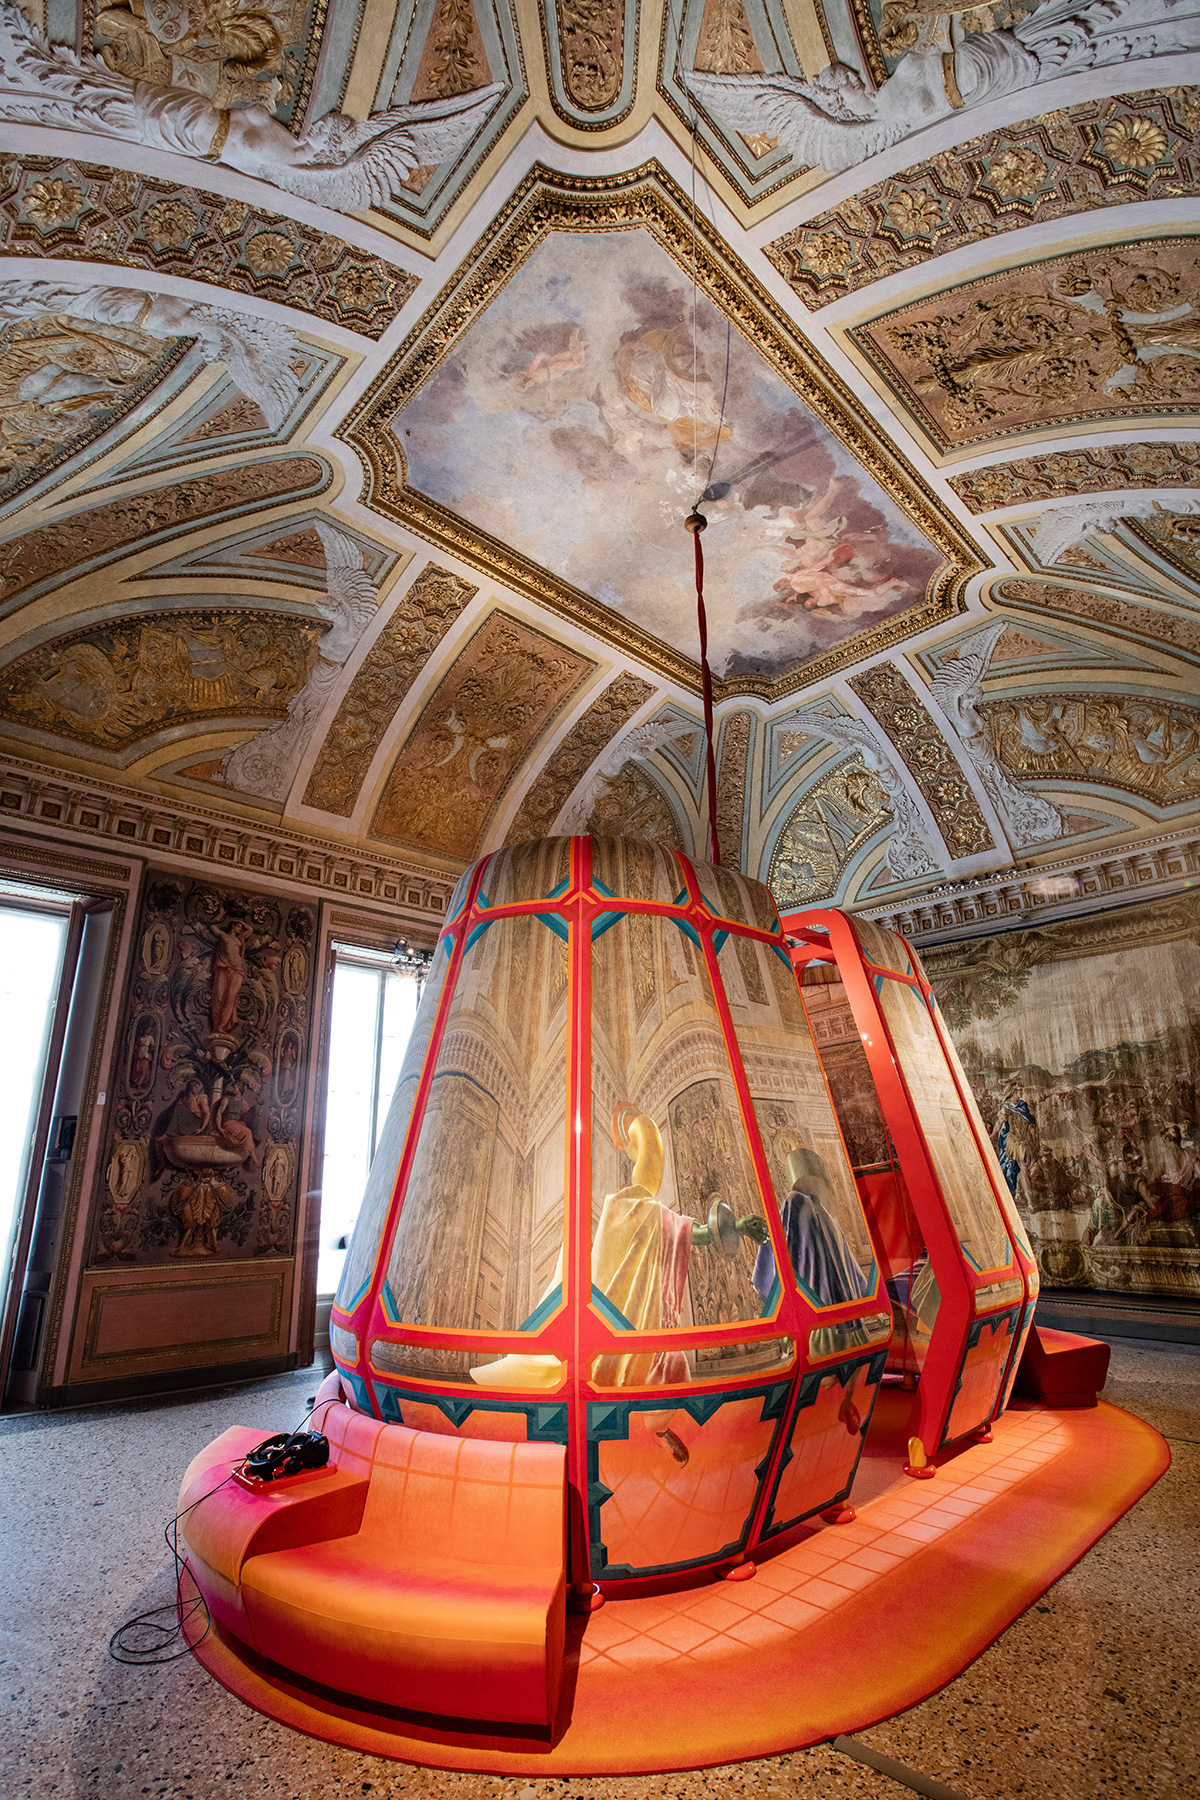 Image of colorful tubular installation in an ornate Italian government building